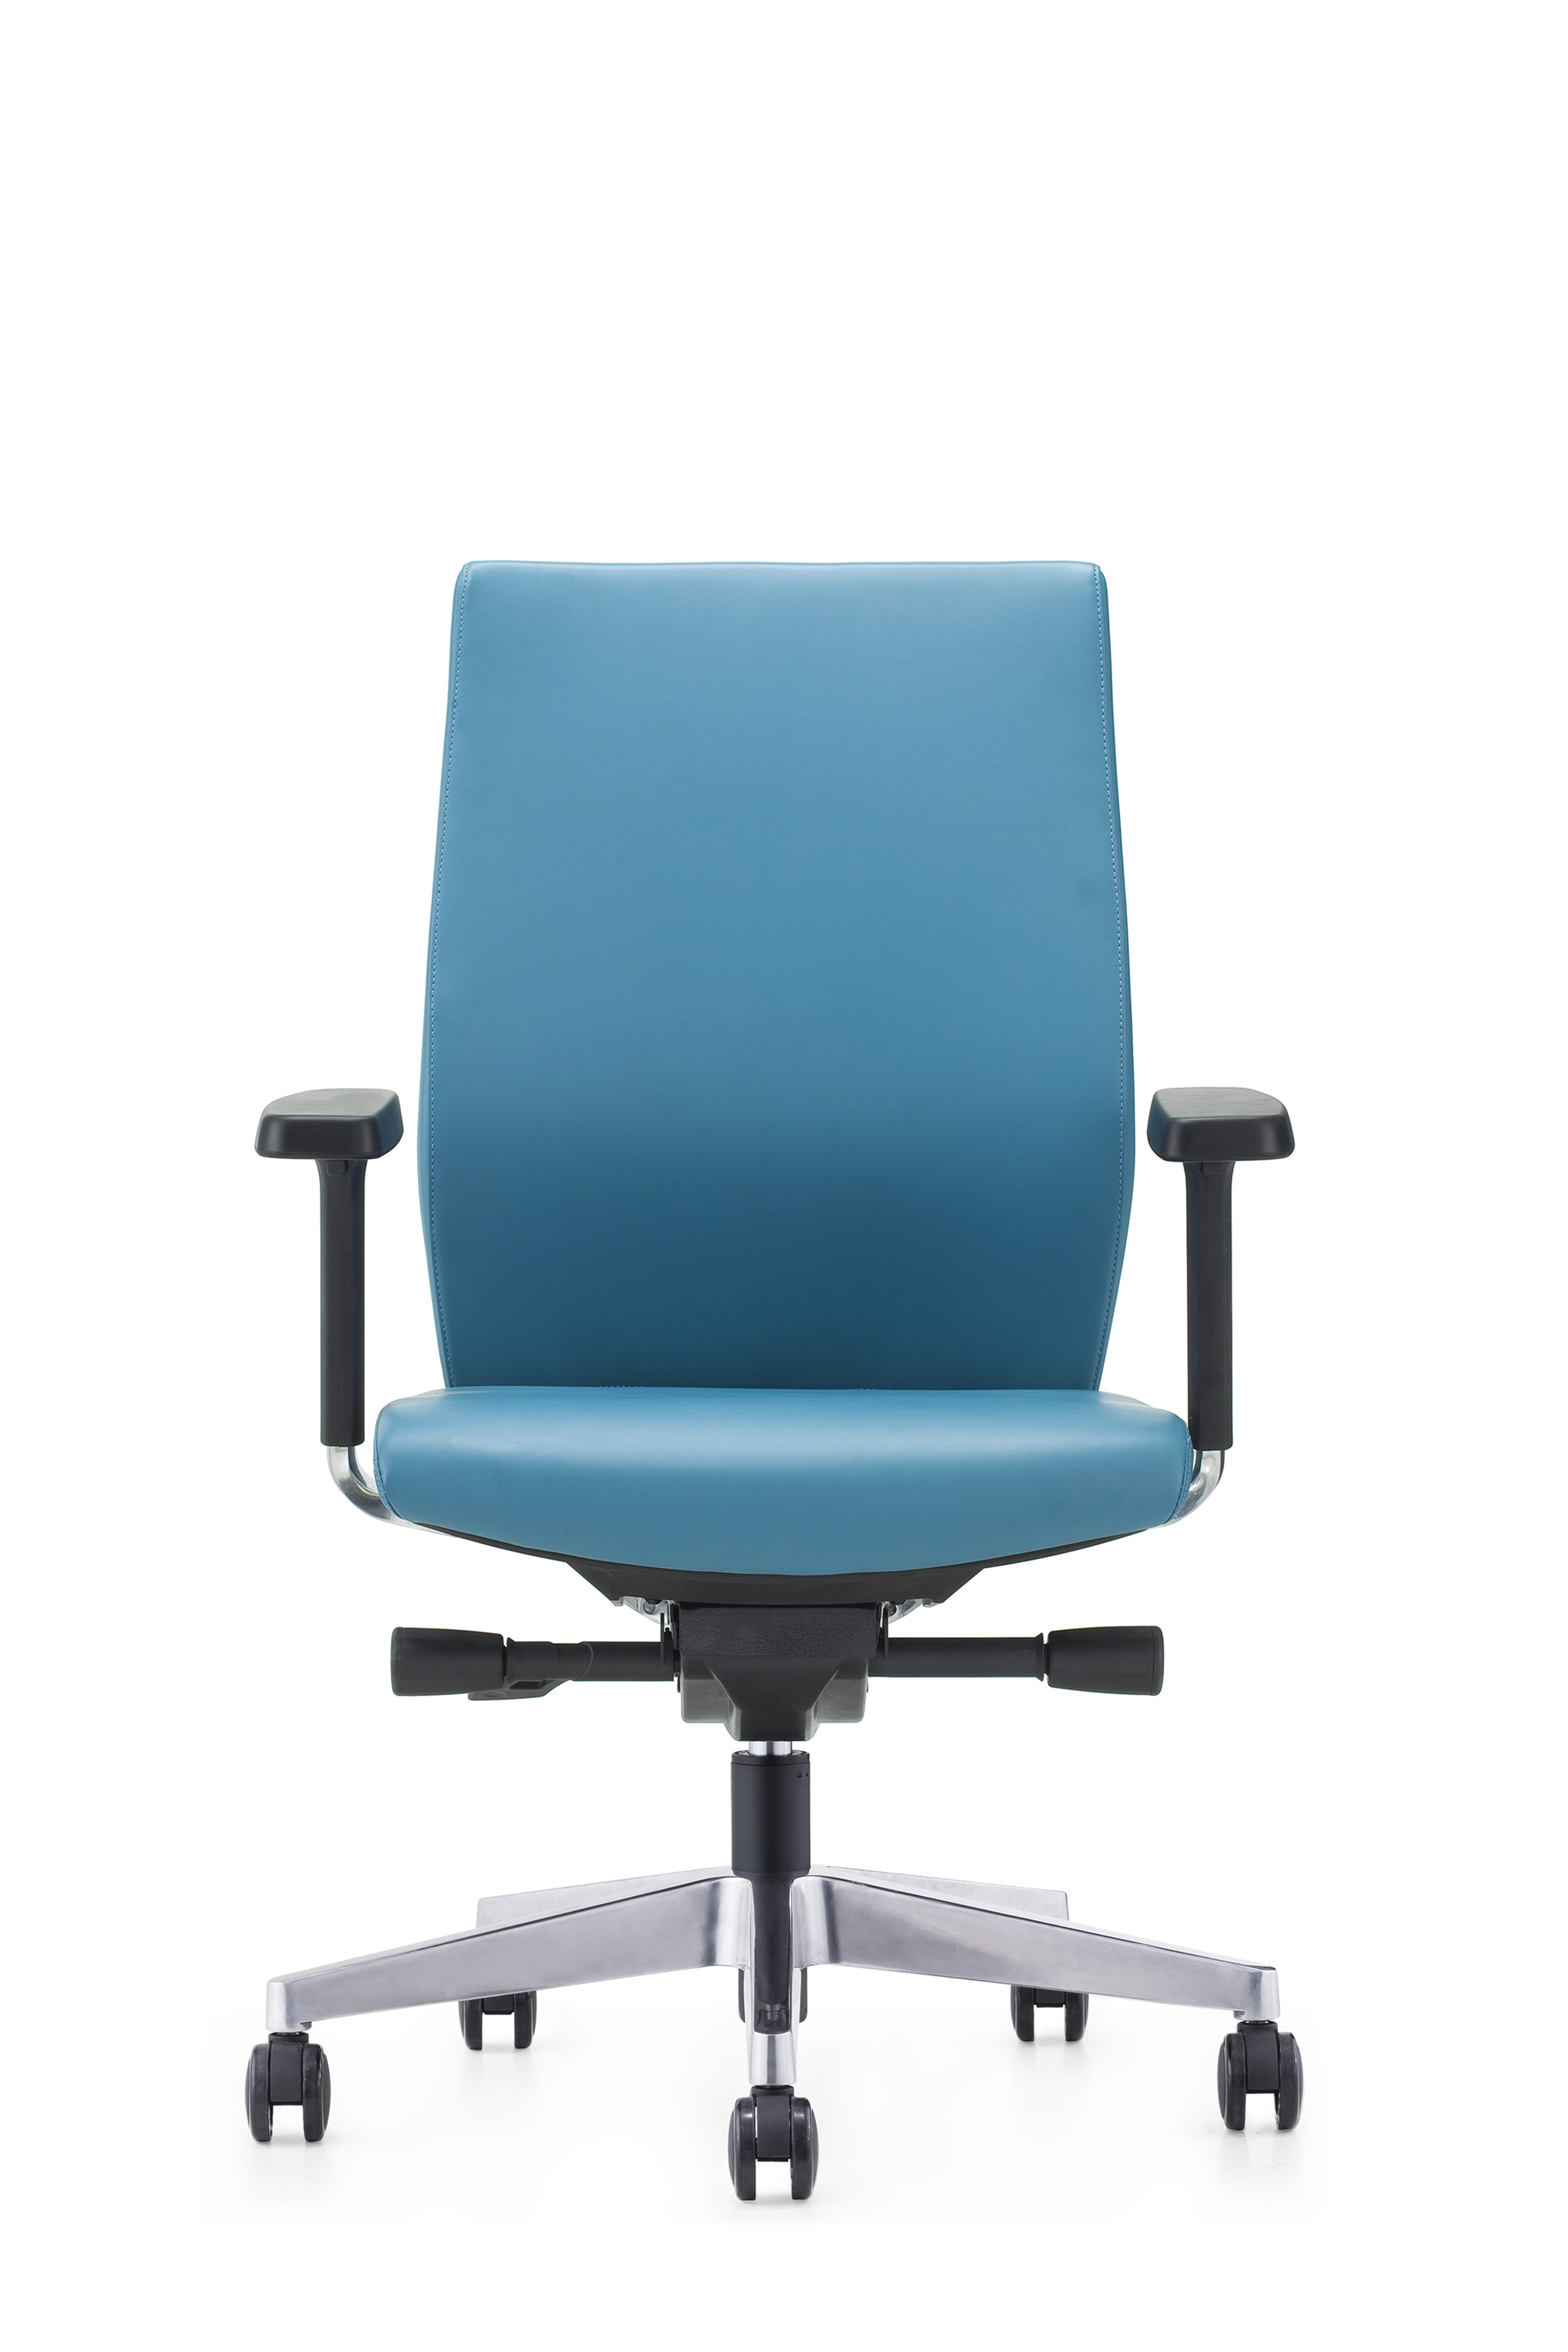 China Wholesale Office Furniture Sets Supplier –  CH-240B – SitZone